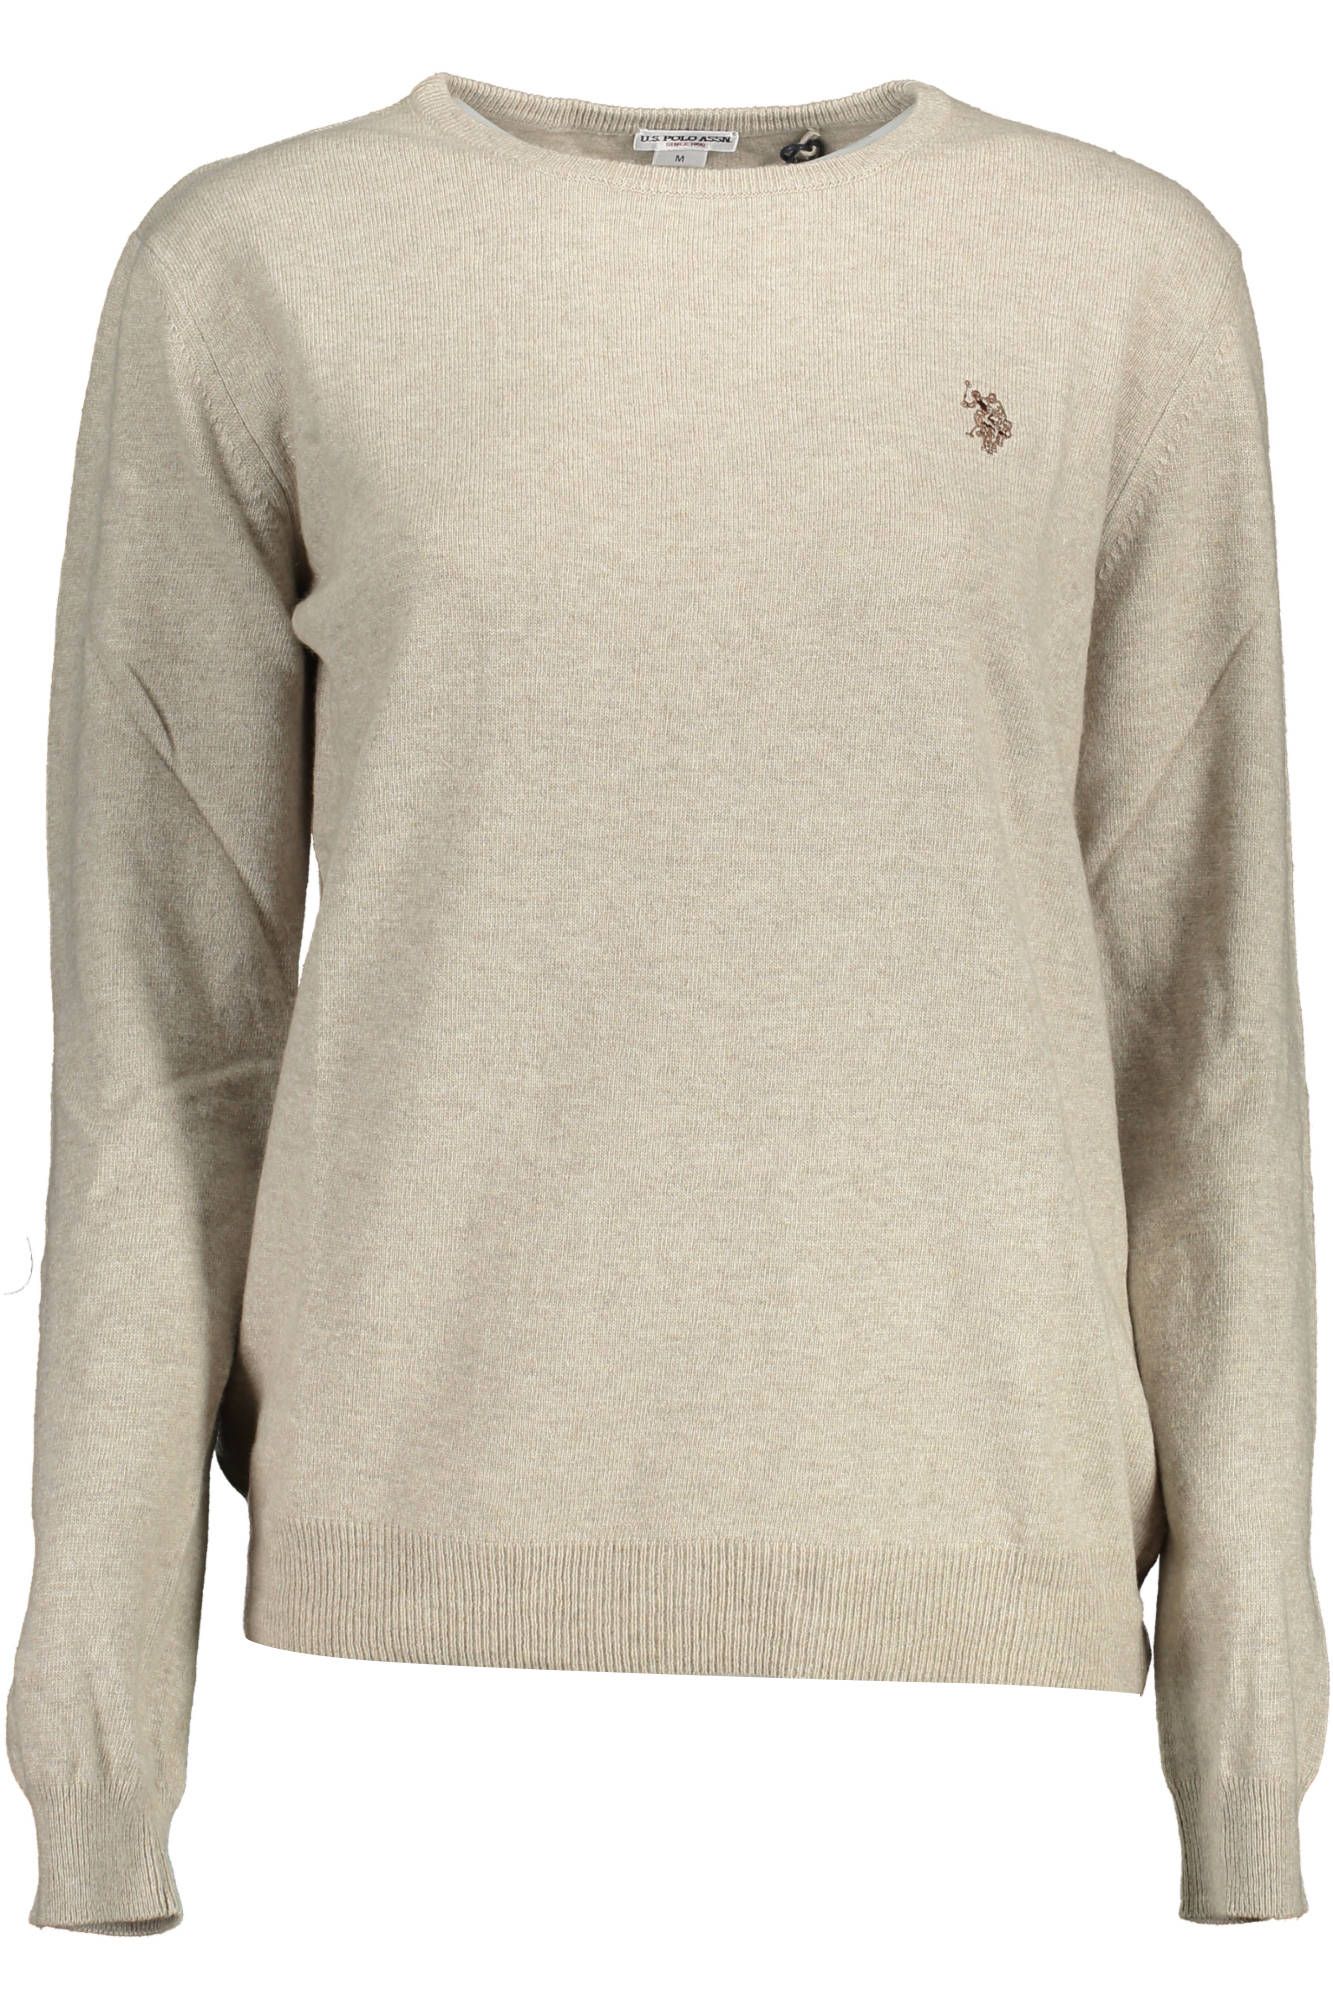 Chic Beige Embroidered Logo Sweater - Divitiae Glamour